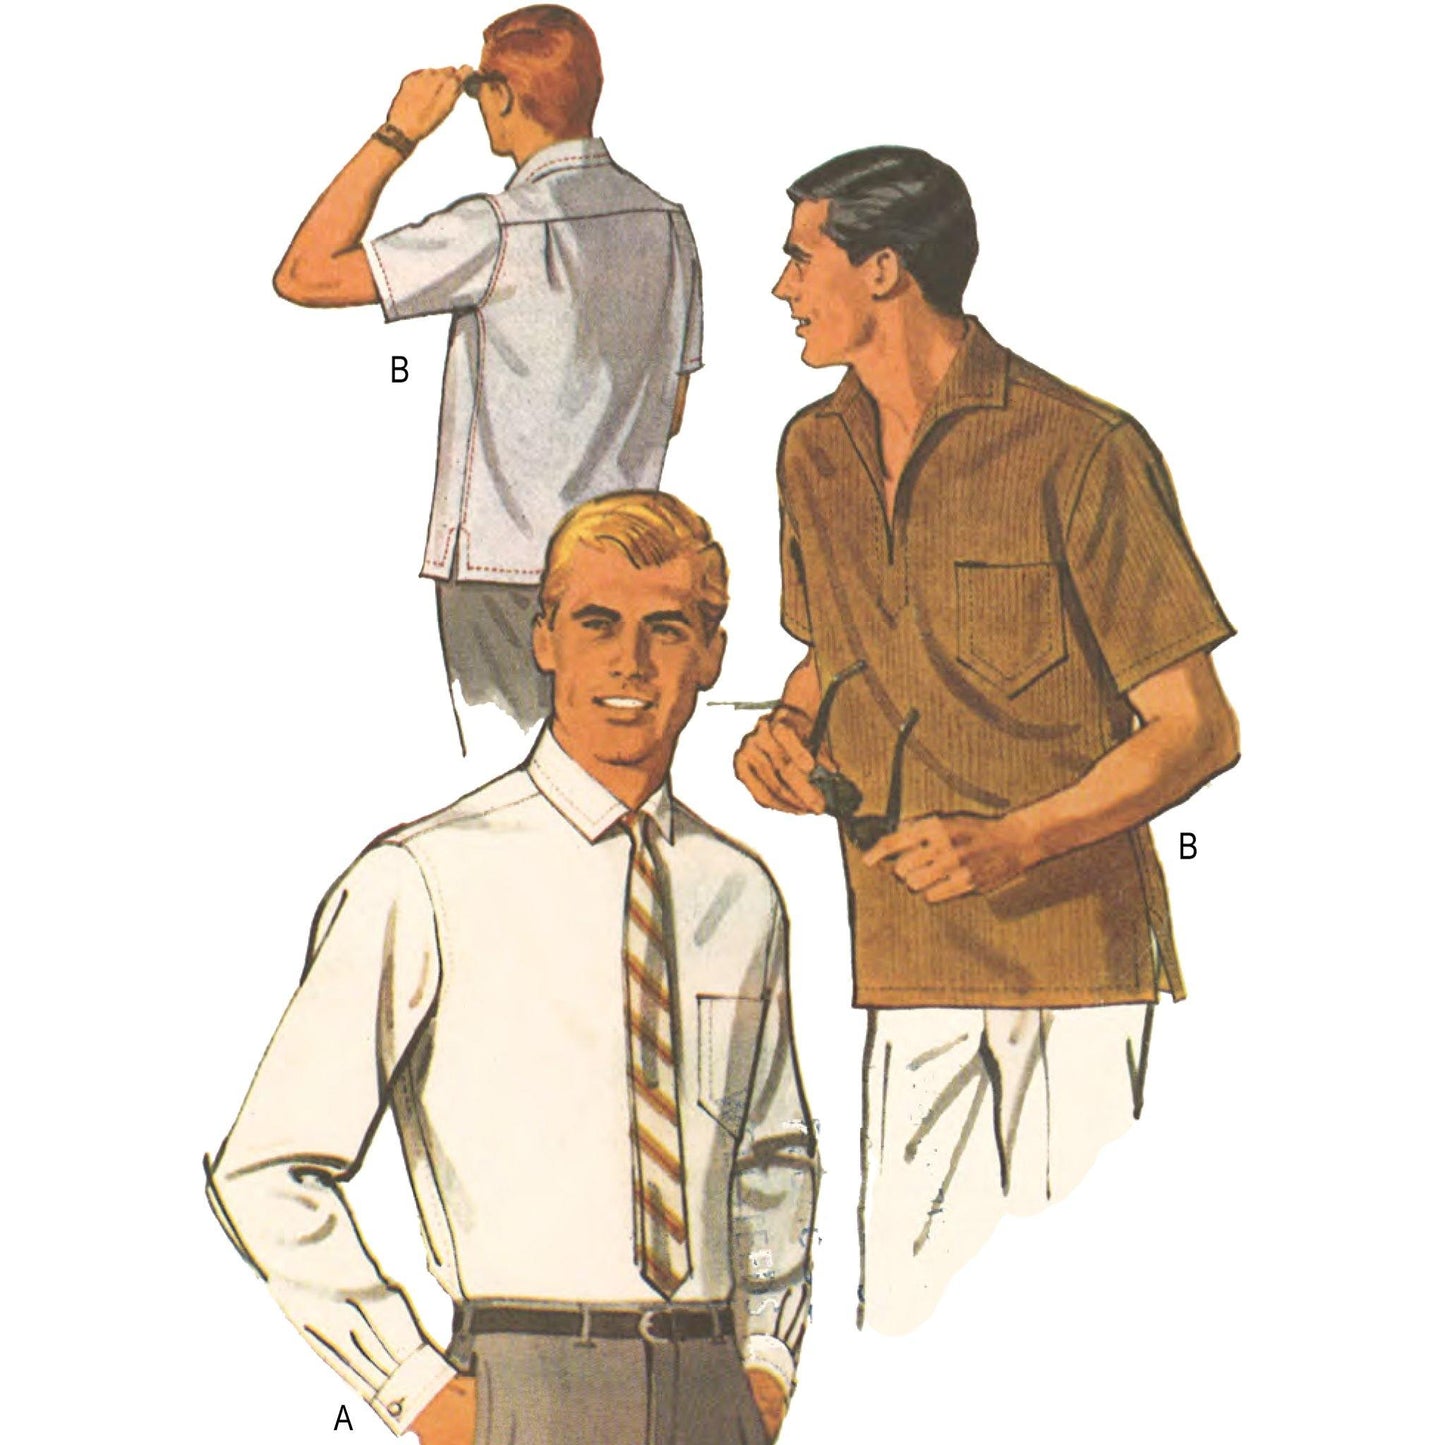 3 men showing 2 views of the shirt. View A with long sleeves, View B with short sleeves.